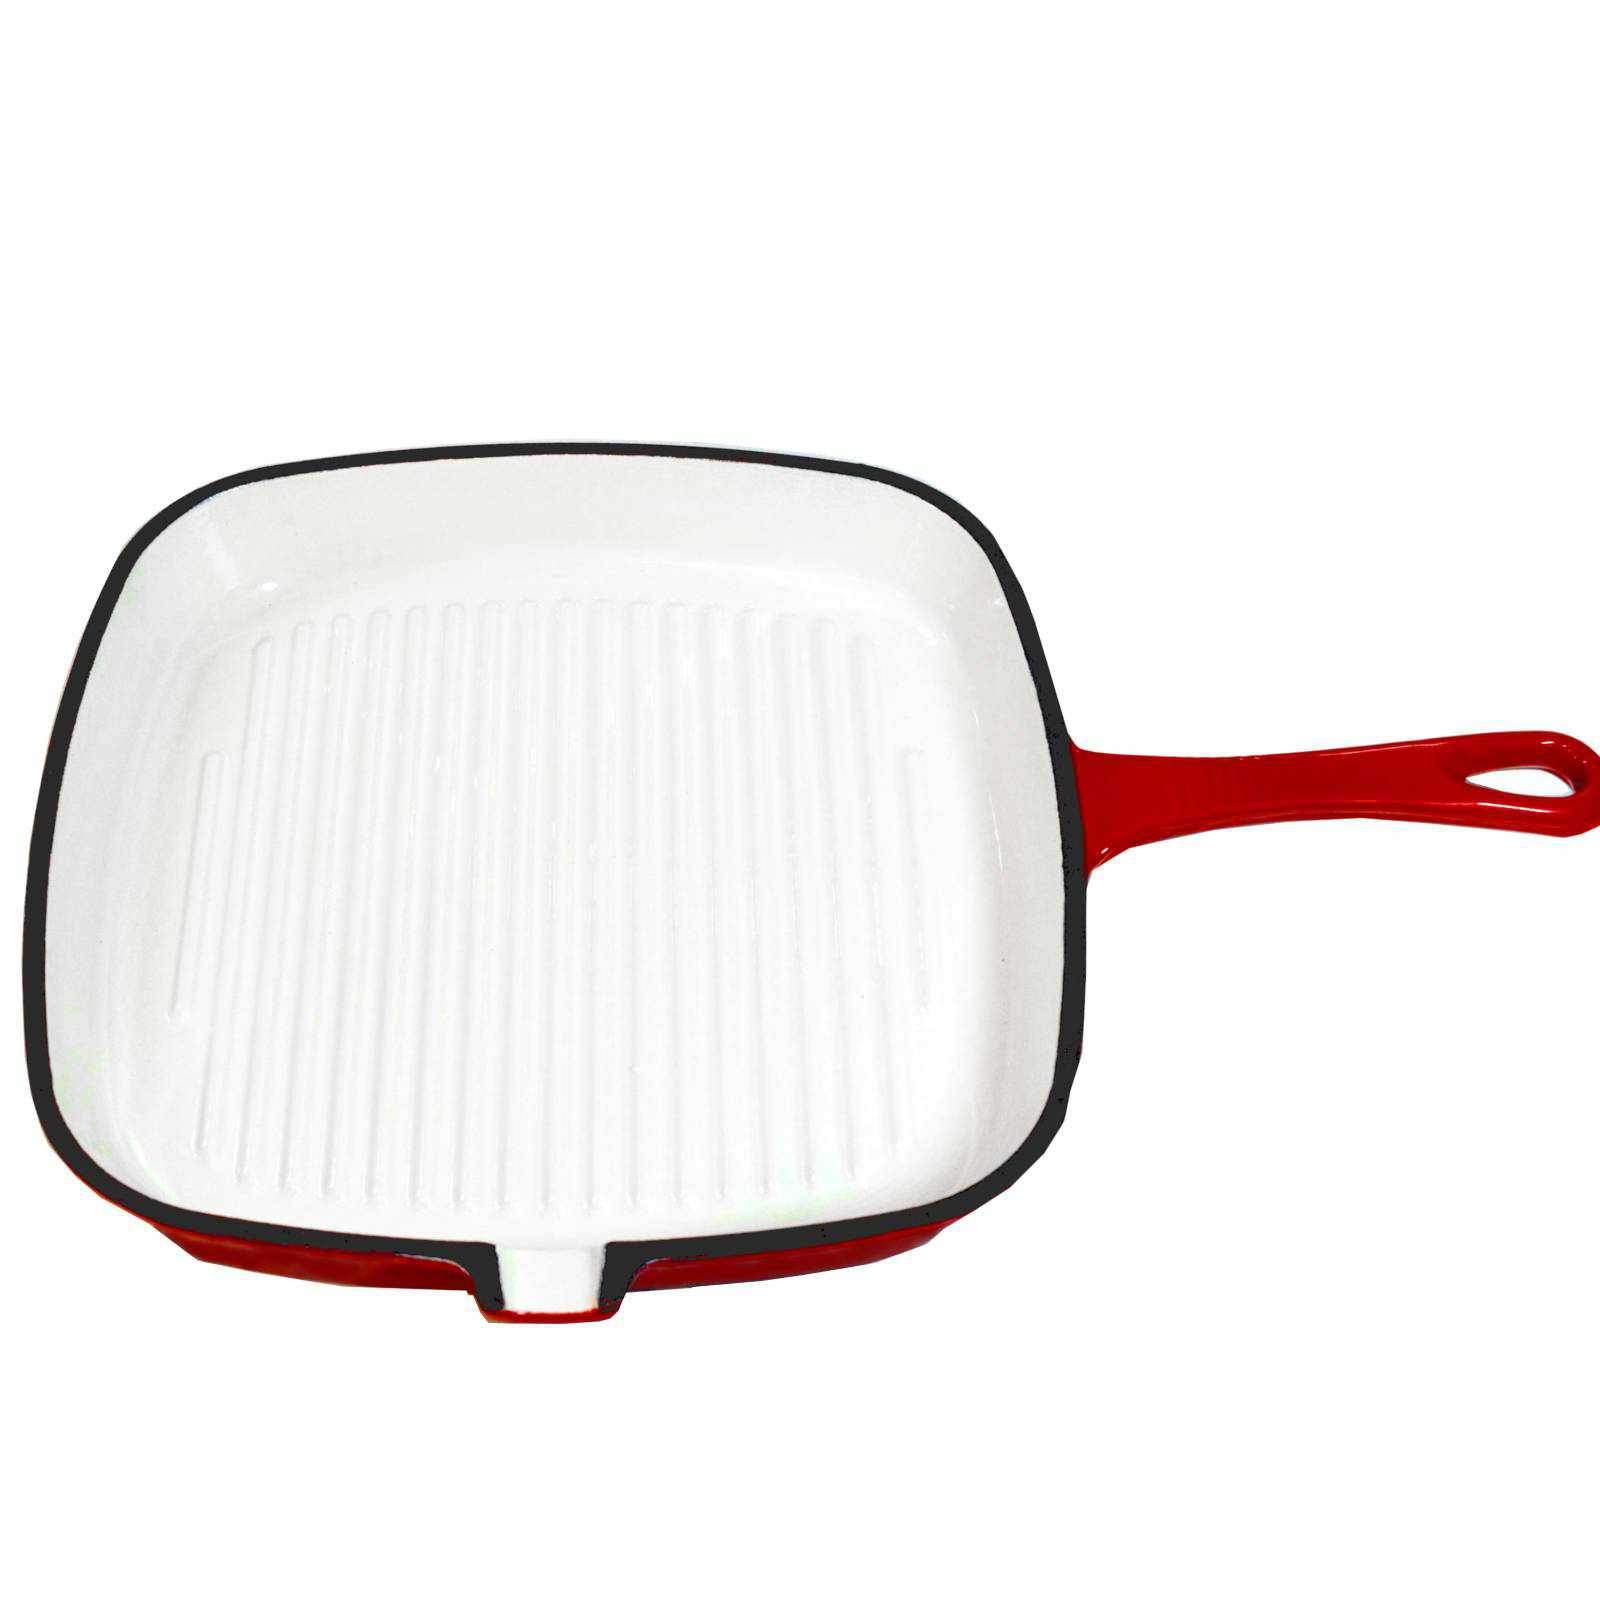 Chef's Quality Enameled Cast Iron Grill (Griddle) Pan 24cm-Frying Pan-Chef's Quality Cookware